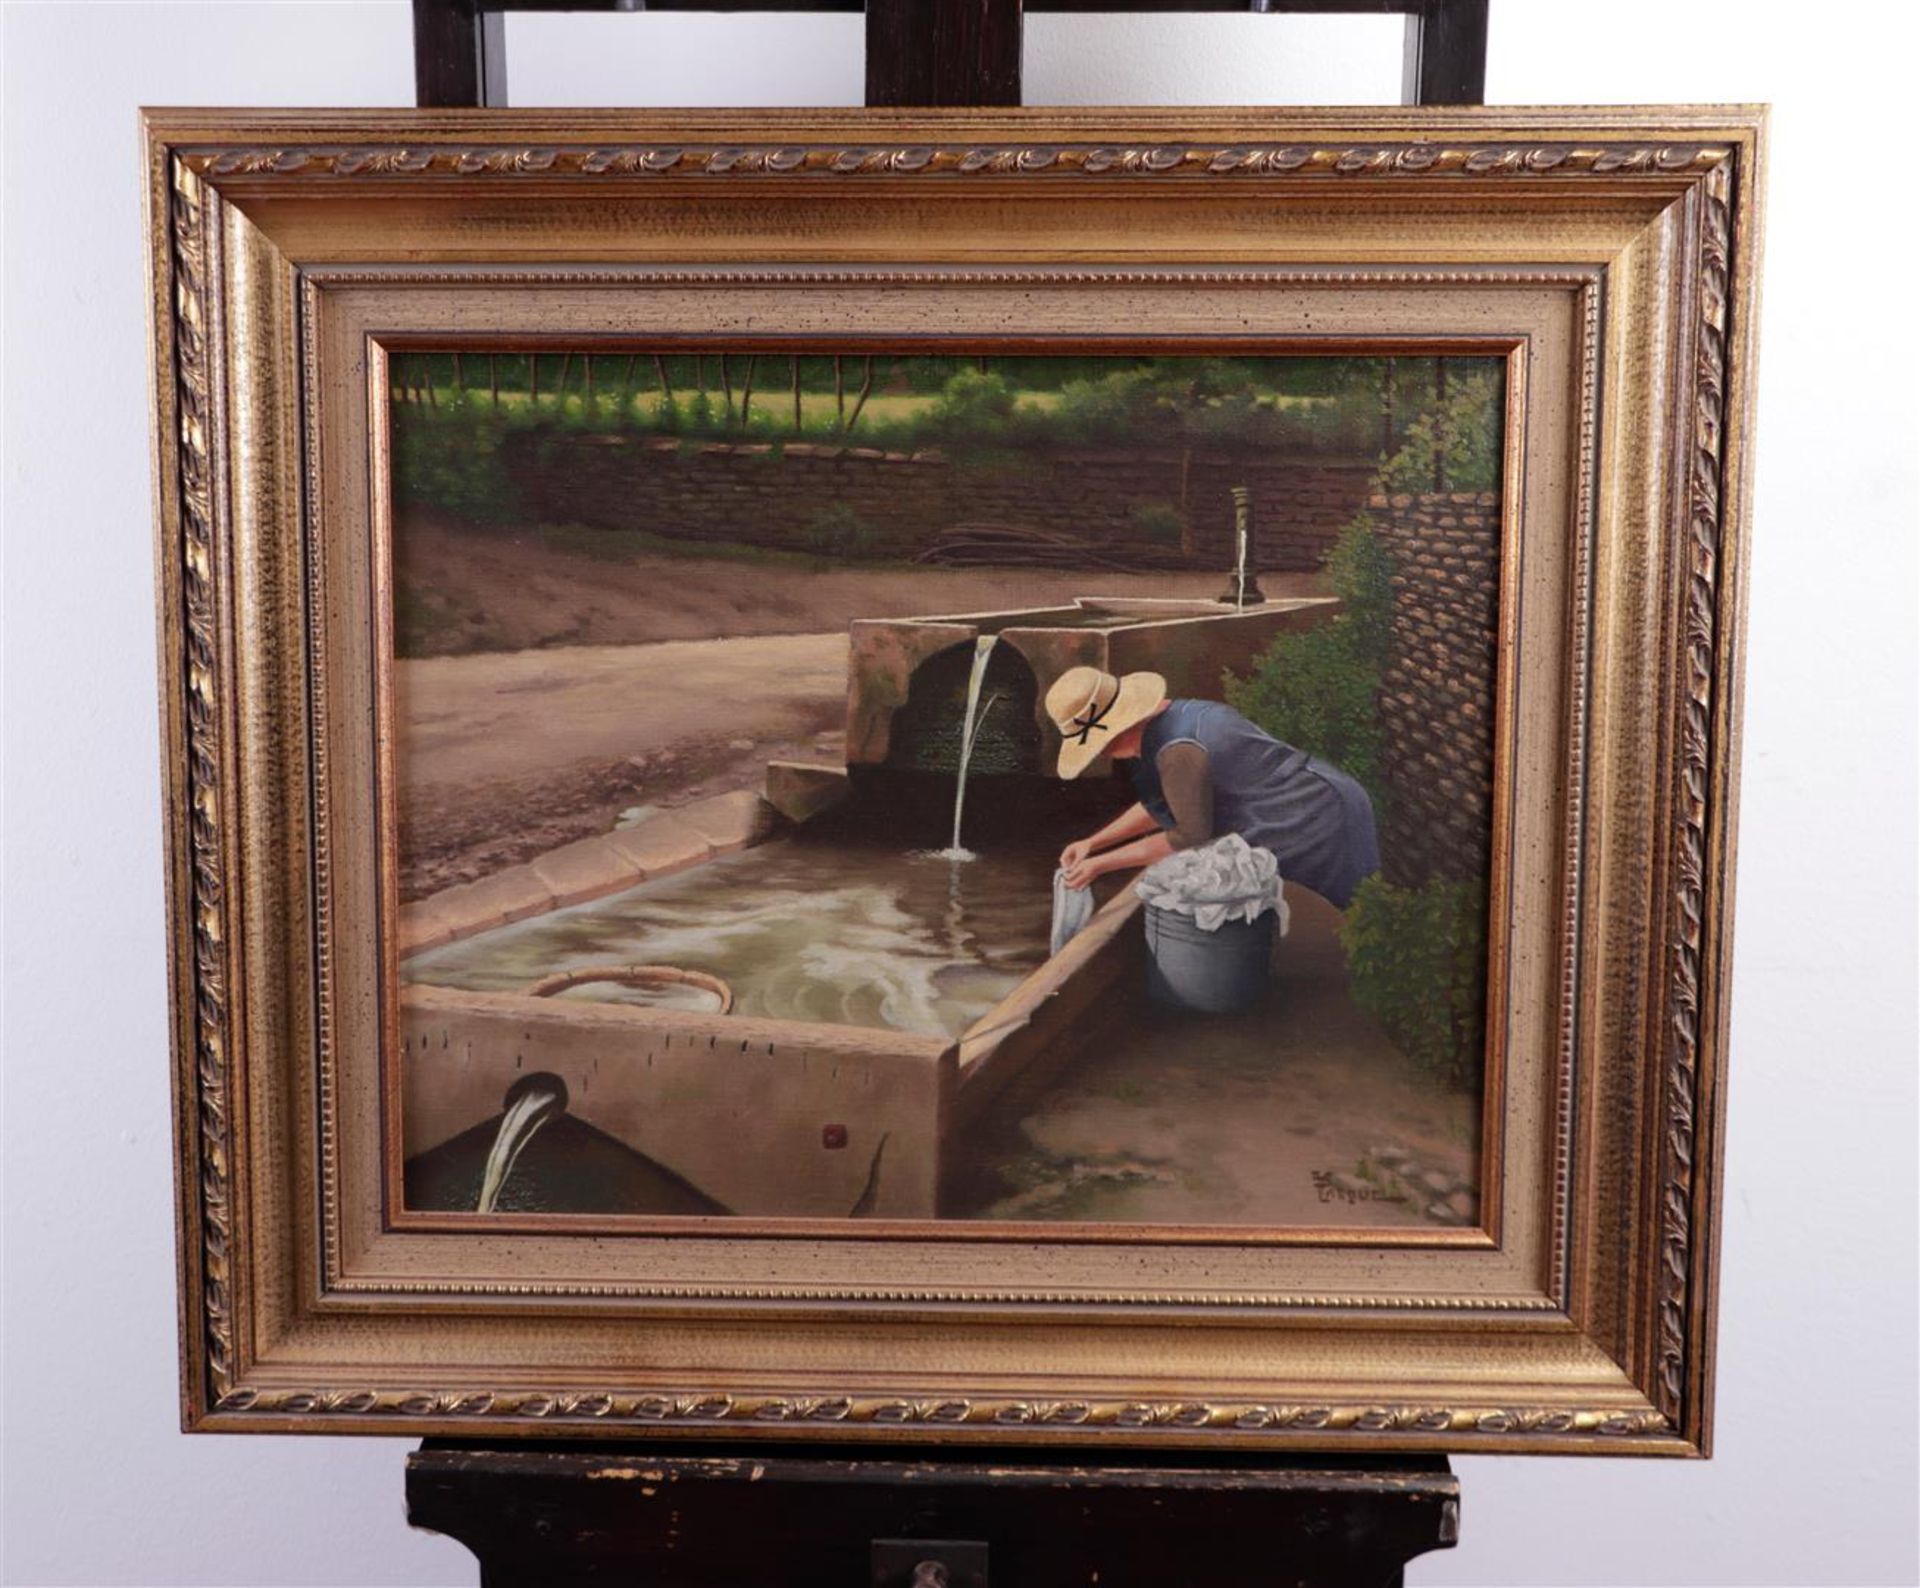 French School, 20th century, Woman at washing place, signed 'Pasque', oil on canvas,
40 x 50 cm. - Bild 2 aus 4